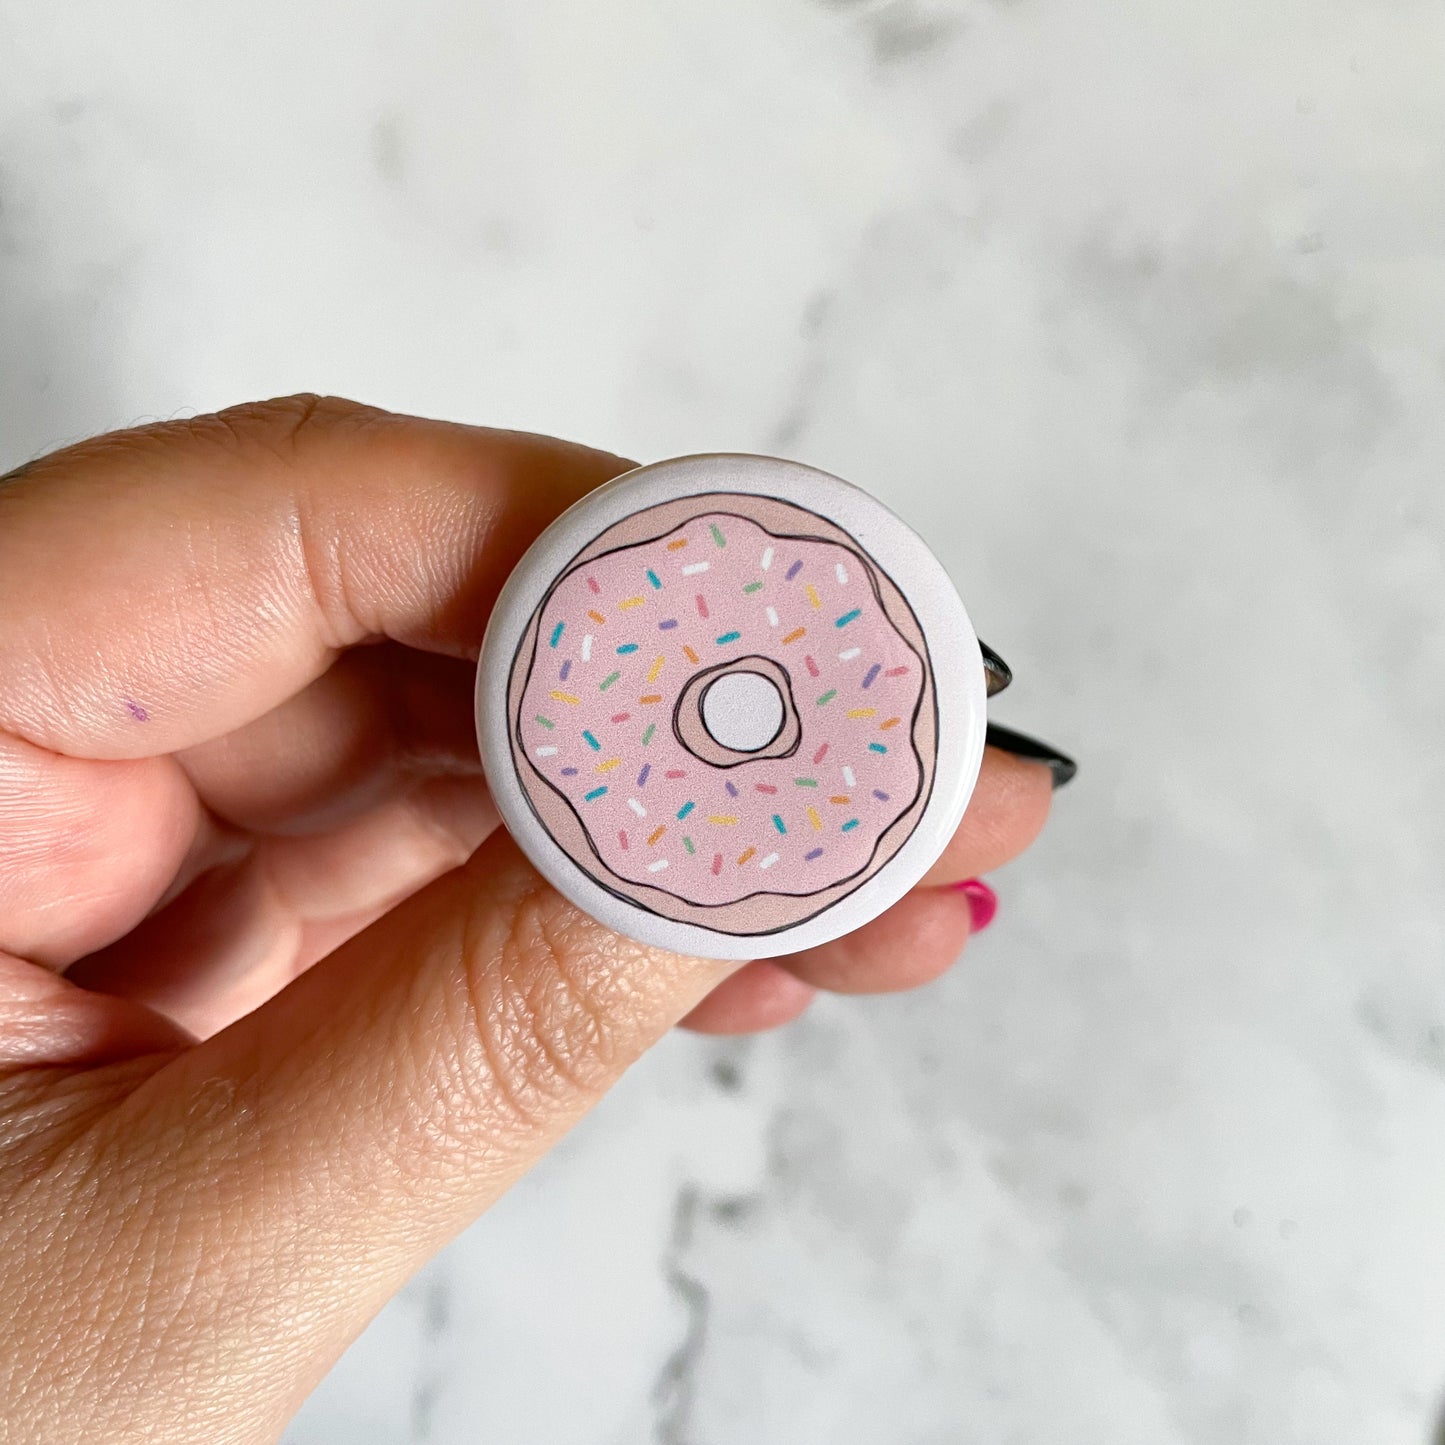 Strawberry Sprinkle Donut Button / Badge (Buy 4 Get 1 FREE)